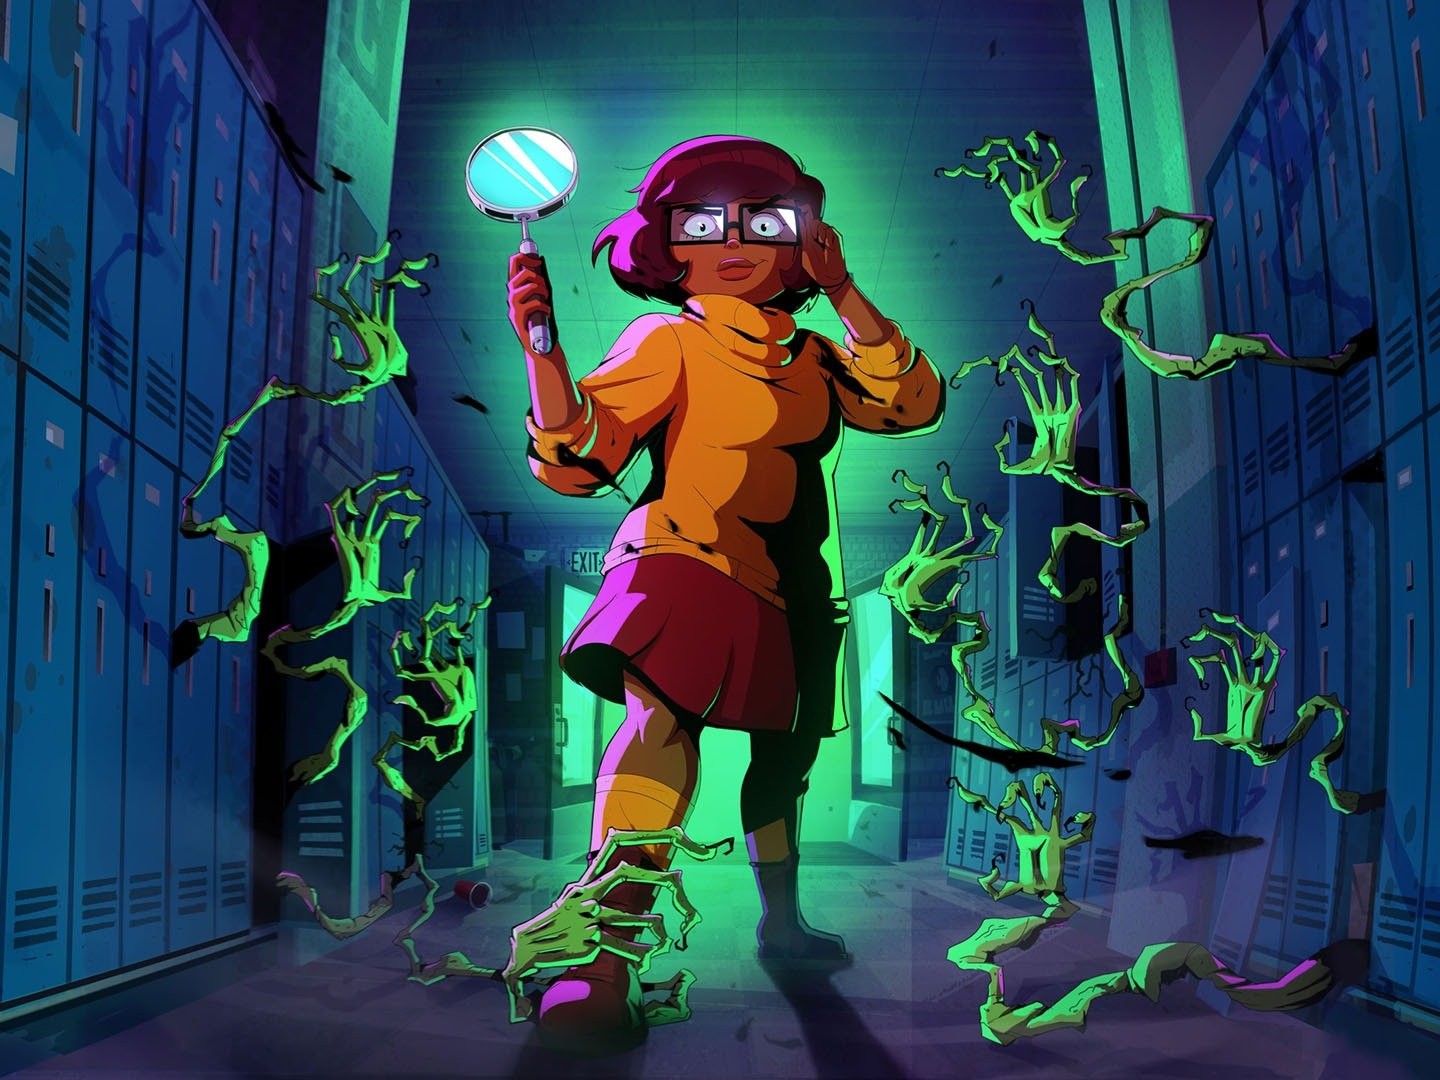 Scooby-Doo Spinoff Velma Show Review-Bombed on IMDb & Rotten Tomatoes